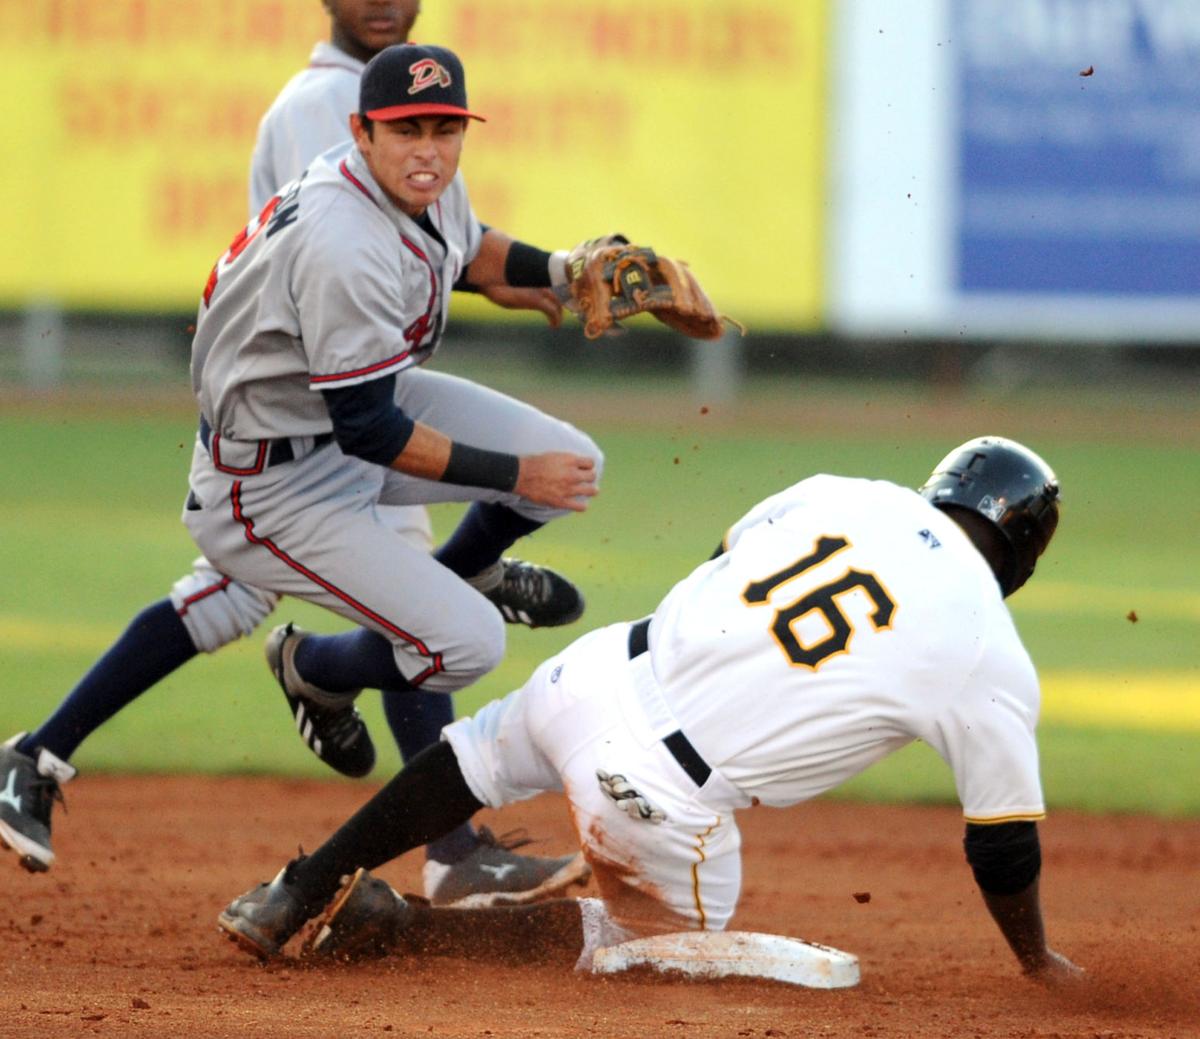 Options plentiful for Braves' third base, bench competitions